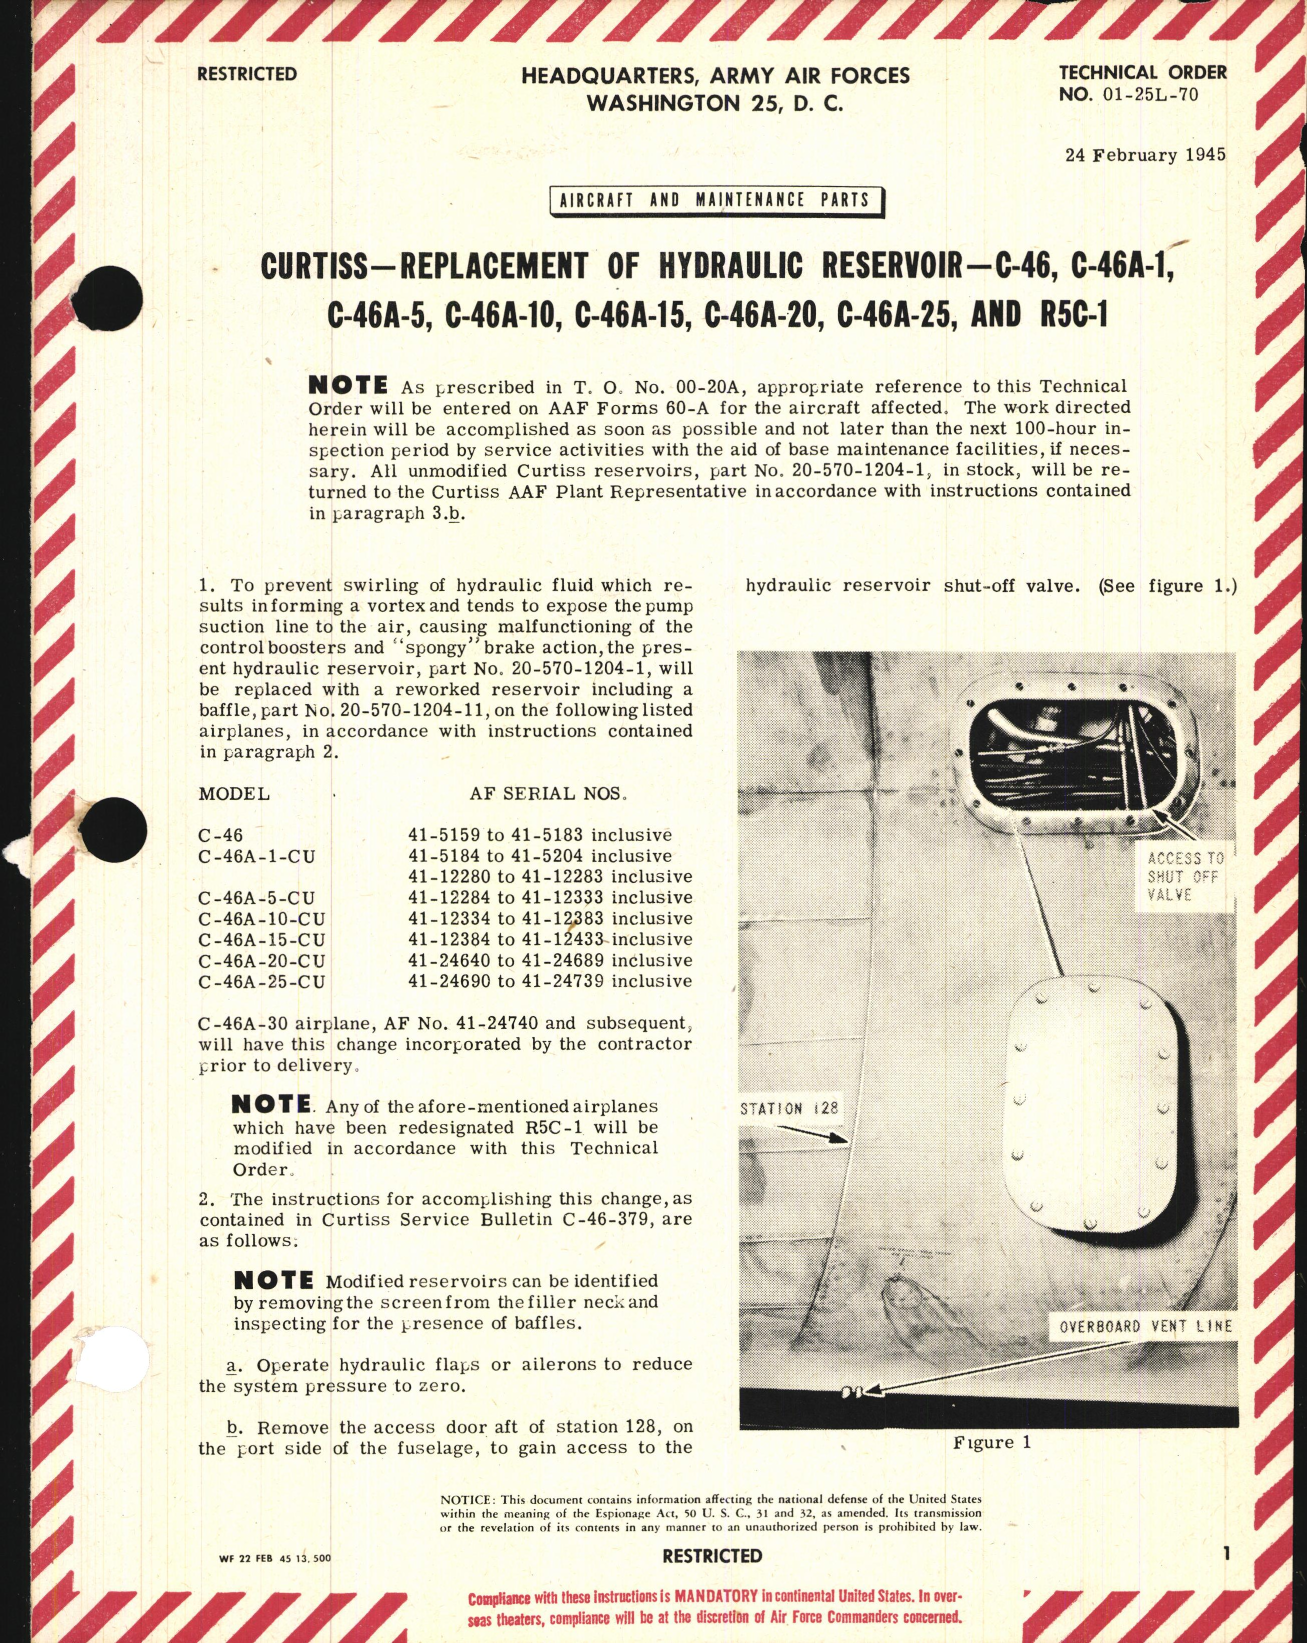 Sample page 1 from AirCorps Library document: Replacement of Hydraulic Reservoir for C-46, C-46A-1, -5, -10, -15, -20, and R5C-1